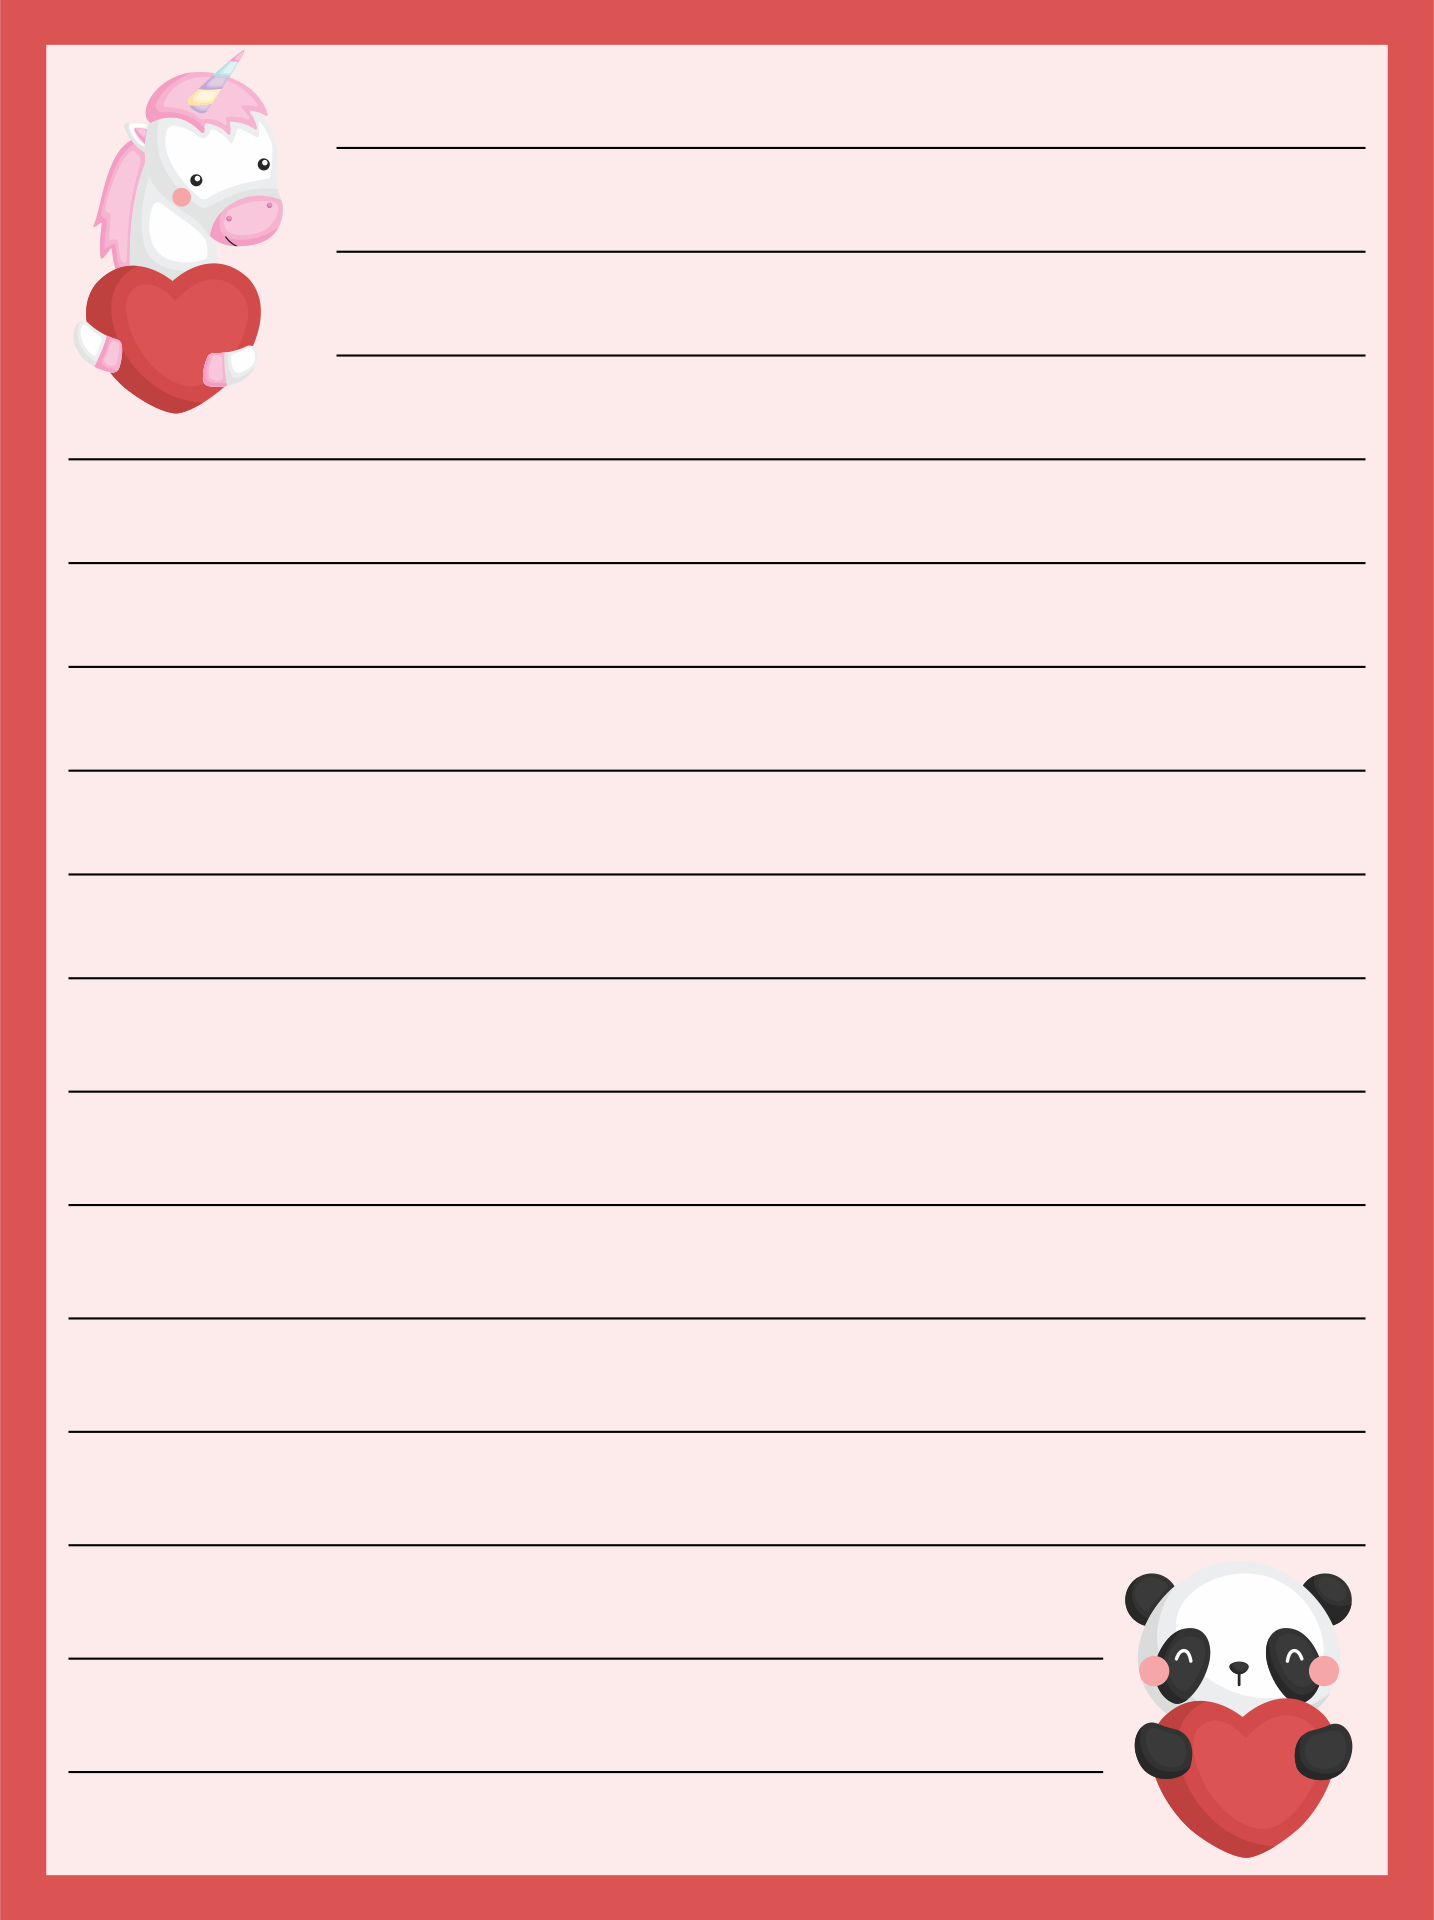 8 Best Images of Printable Love Letter Stationery - Free Printable ...